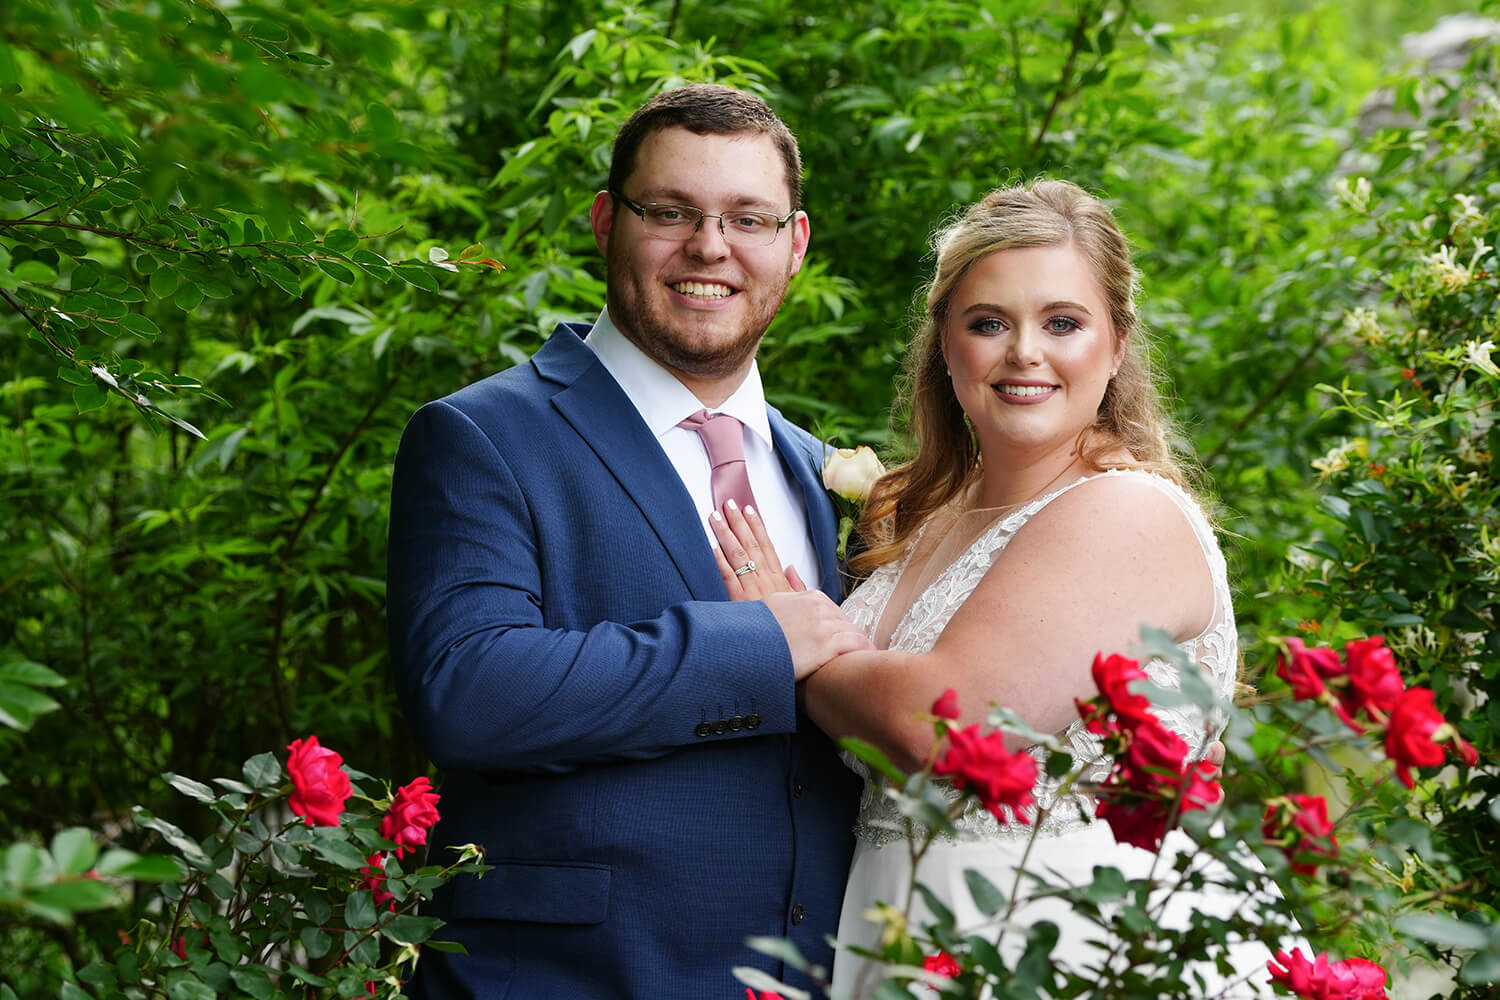 Wedding couple posing in front of red roses in the summer